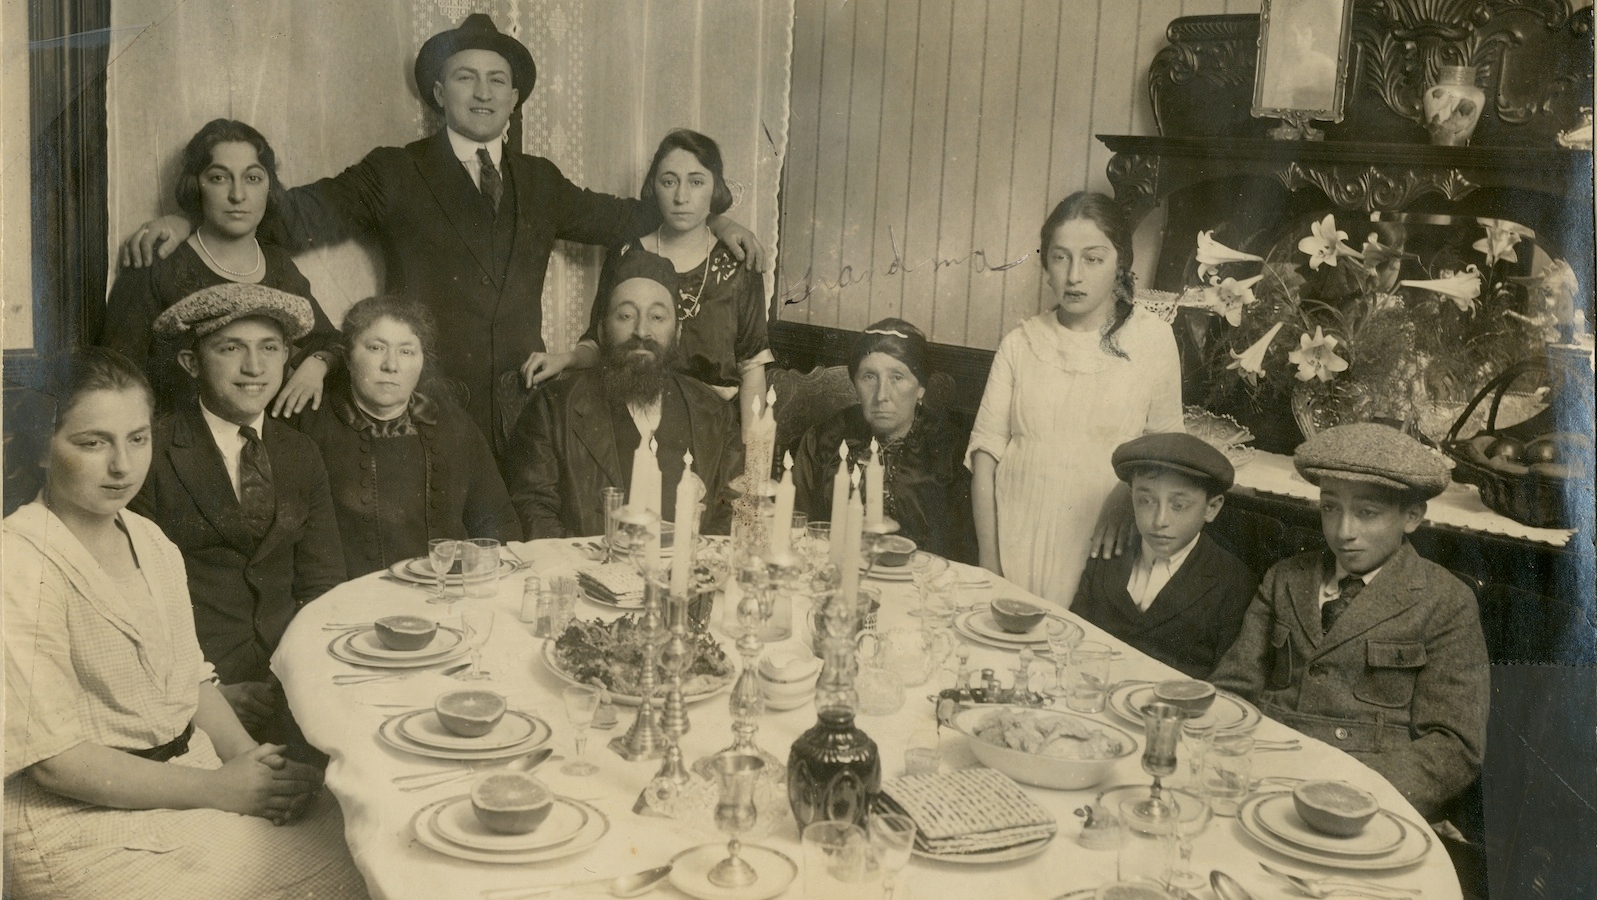 A black and white photo of a Passover seder in the 1920s. Grandparents, parents and children are pictured around a table decorated for a seder.